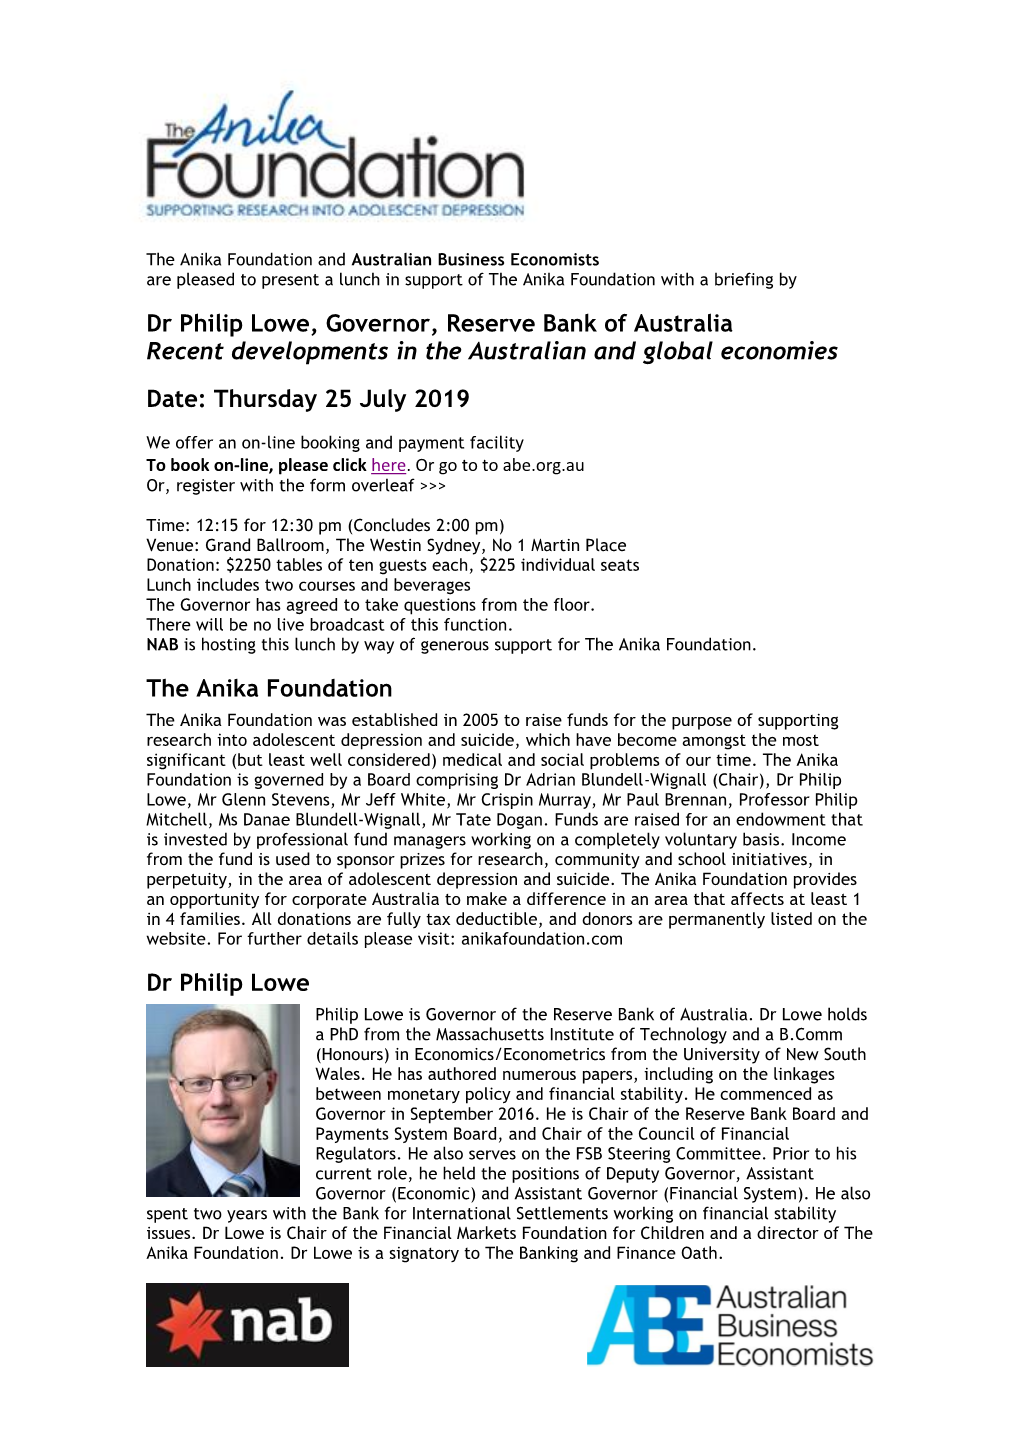 Australian Business Economists Are Pleased to Present a Lunch in Support of the Anika Foundation with a Briefing By